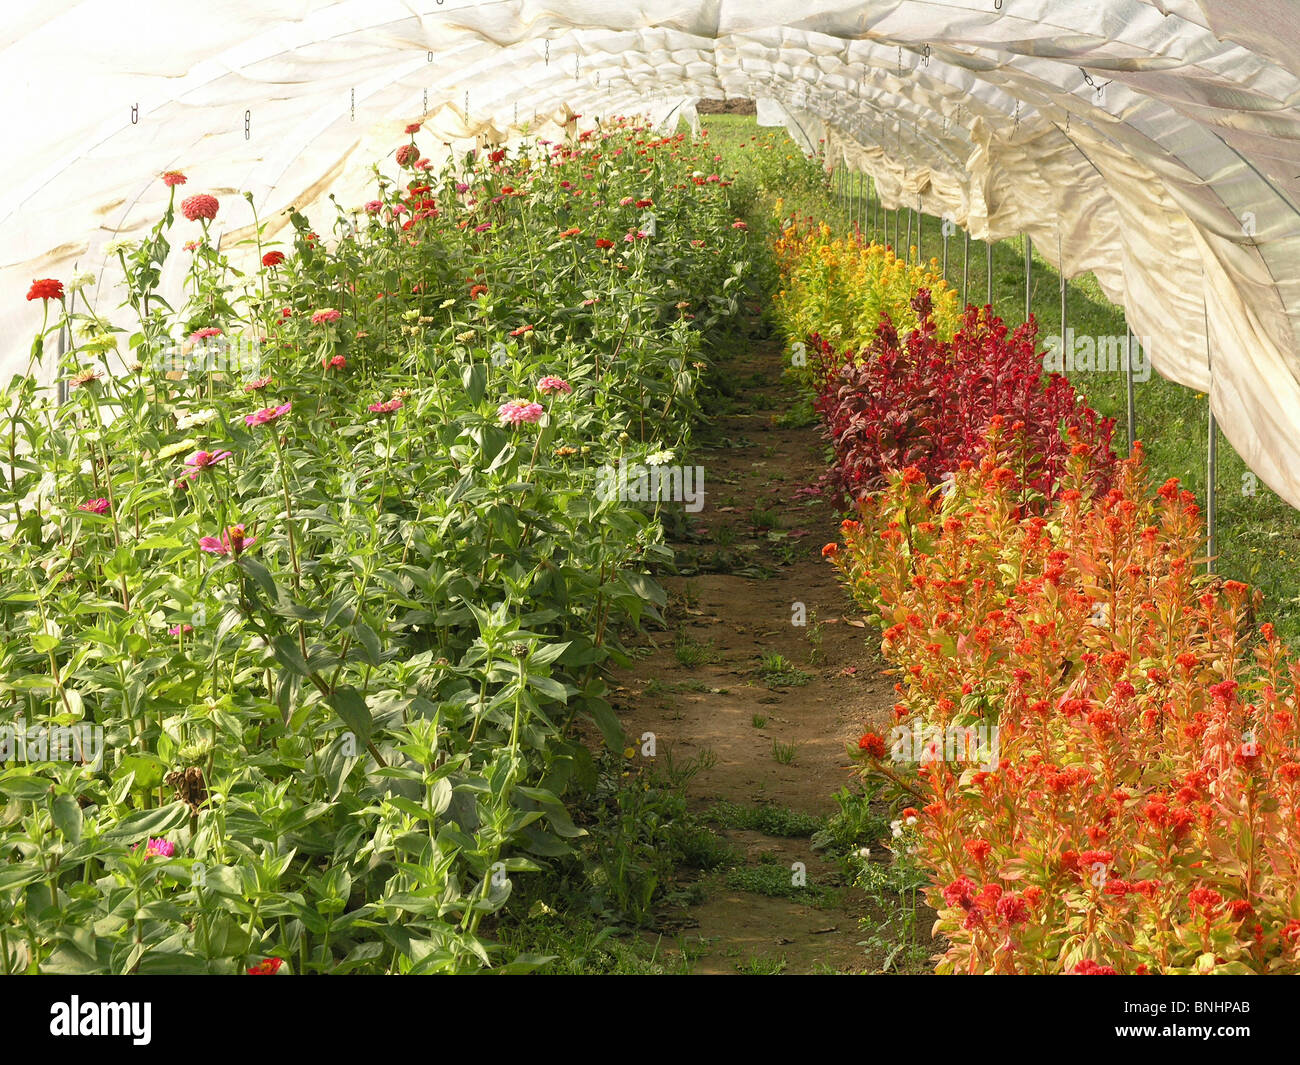 Switzerland market garden cover covered plants field agriculture farming greenhouse gardening inside flowers flowering Stock Photo